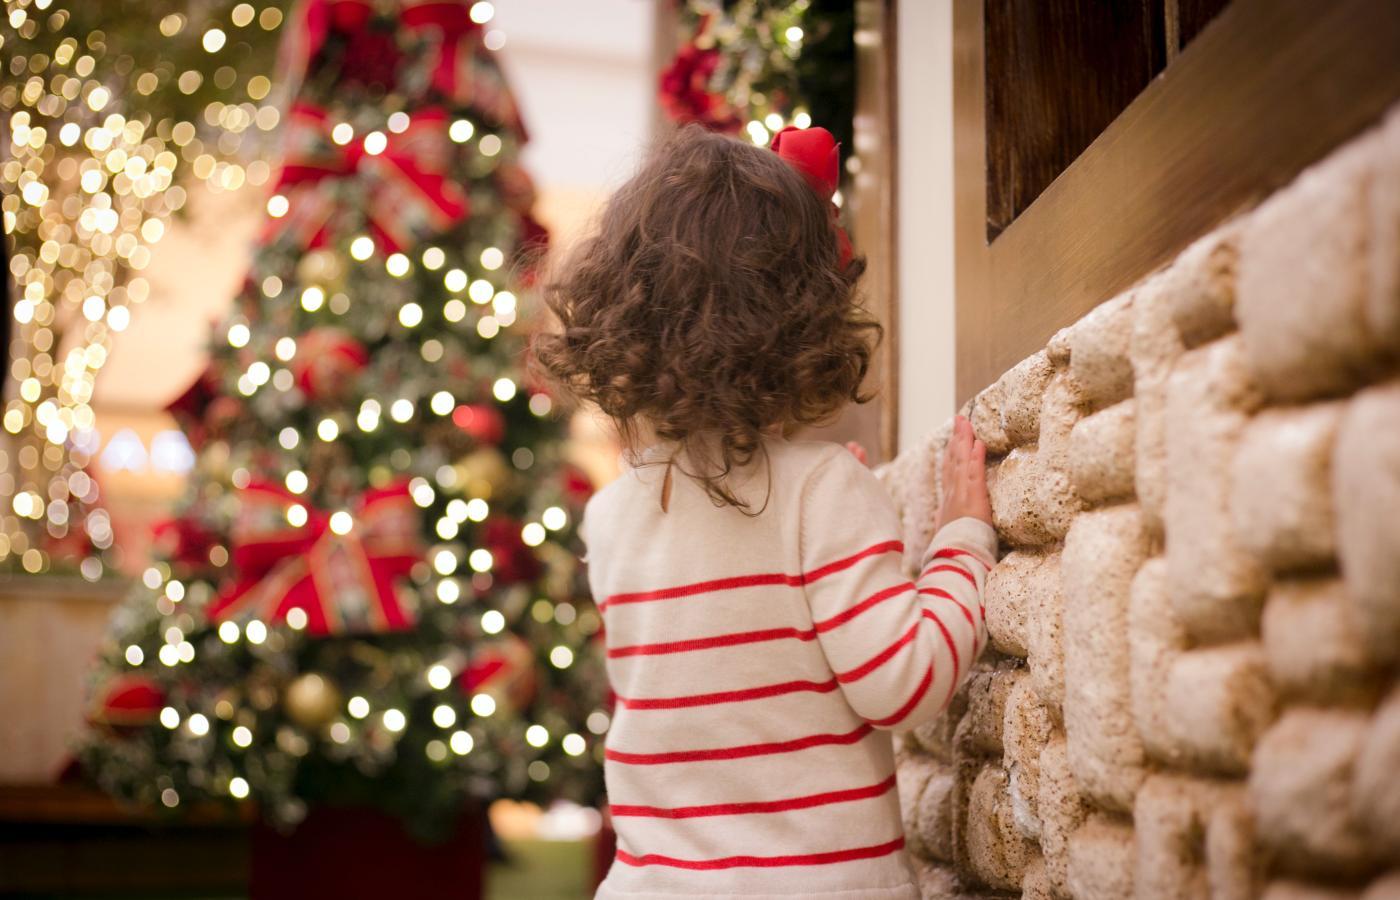 A small child in red stripped sweater looking at a Christmas tree